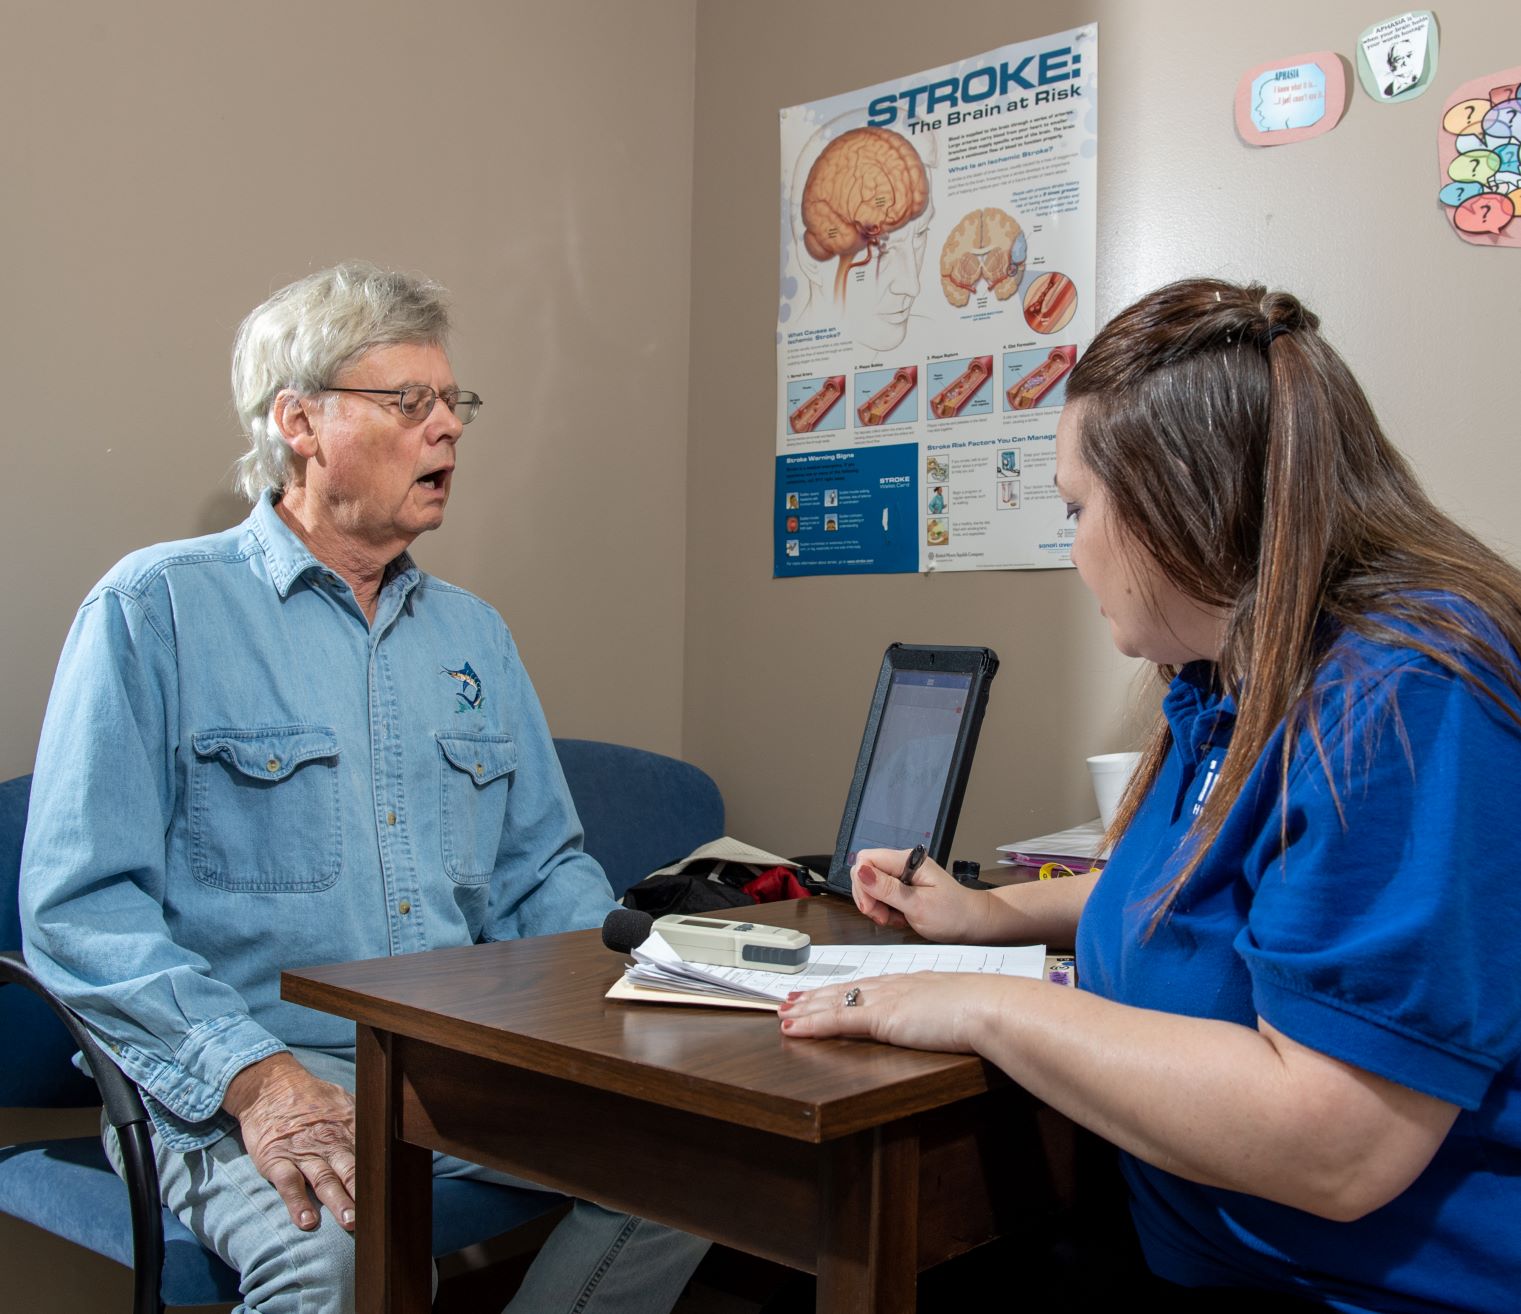 An older person doing speech exercises with a speech language pathologist at a table